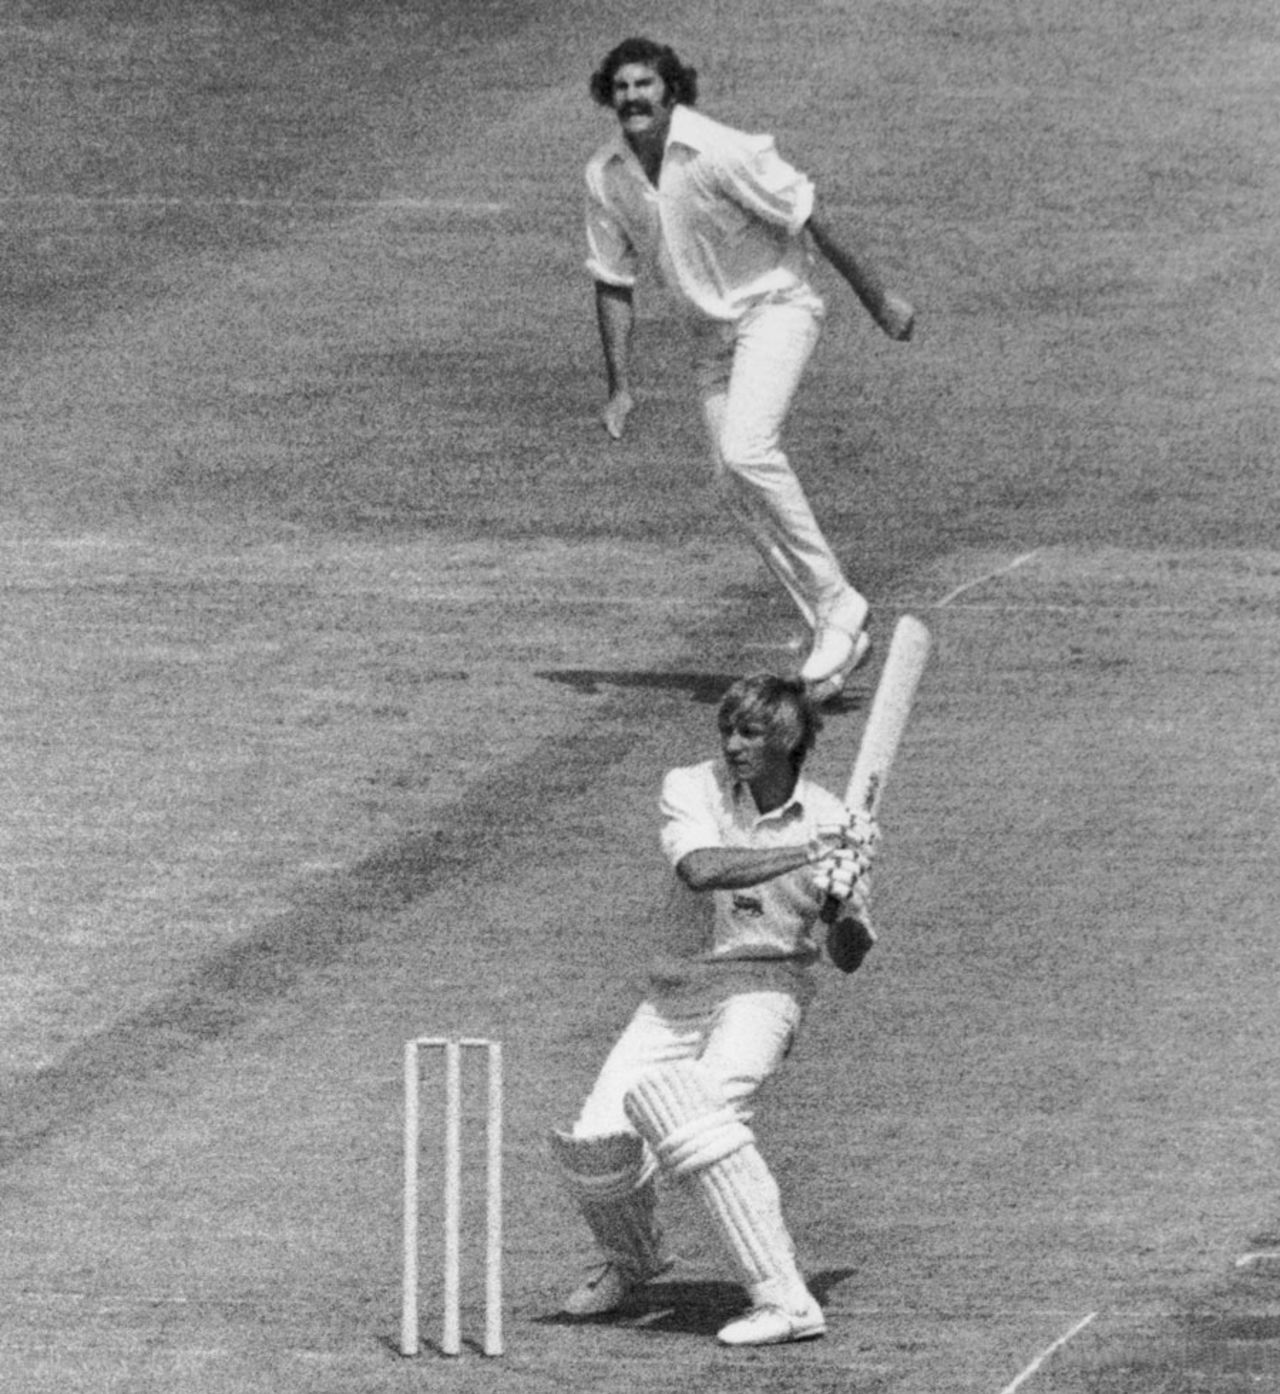 Frank Hayes hits a delivery from Richard Collinge, England v New Zealand, World Cup, Trent Bridge, June 11, 1975 